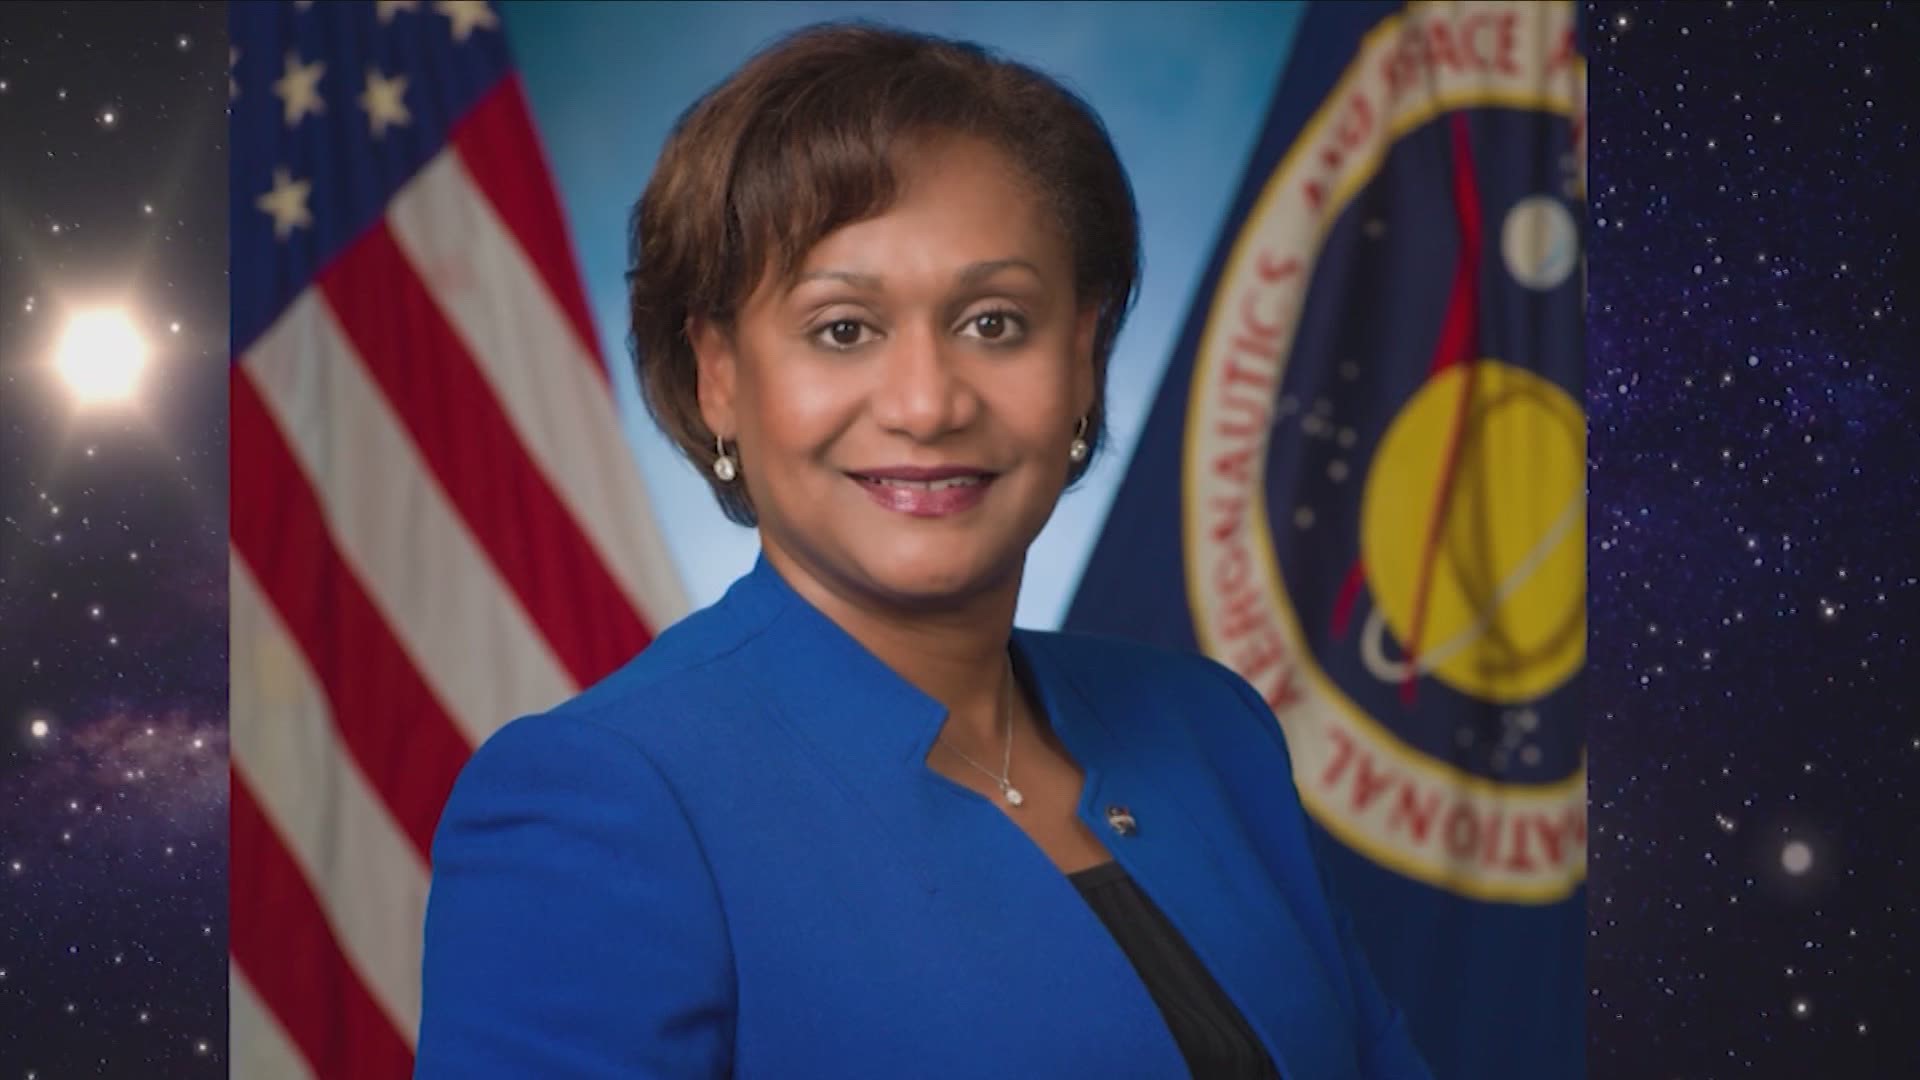 She was named acting director on May 3 but Wyche had served as deputy director of JSC since August 2018. Before that, the 31-year NASA veteran held a number of roles